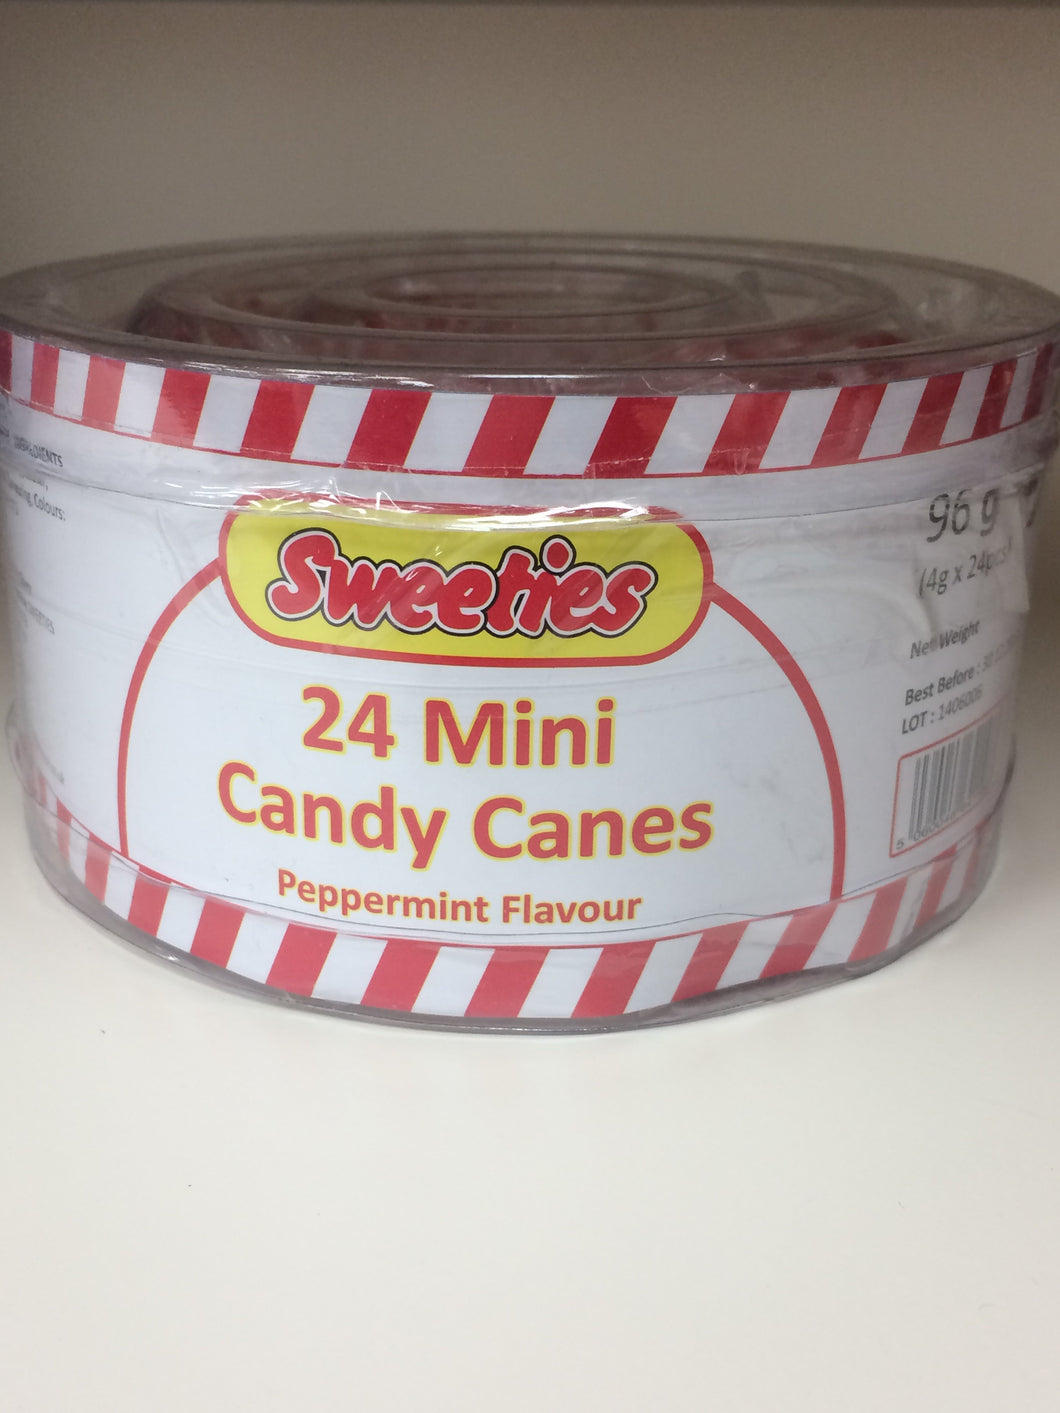 Sweeties 24x Mini Candy Canes Peppermint Flavour 96g